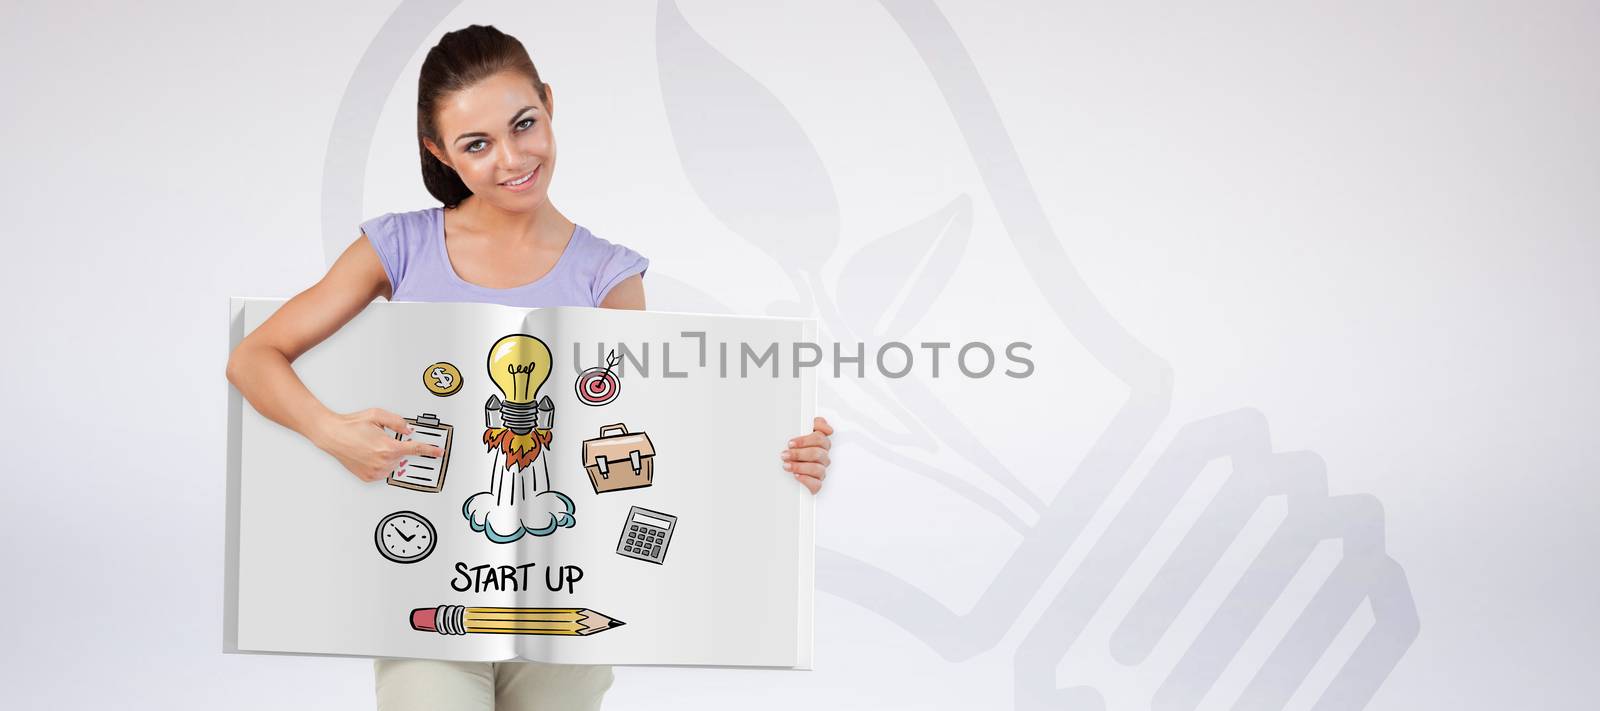 Composite image of pretty woman showing a book by Wavebreakmedia